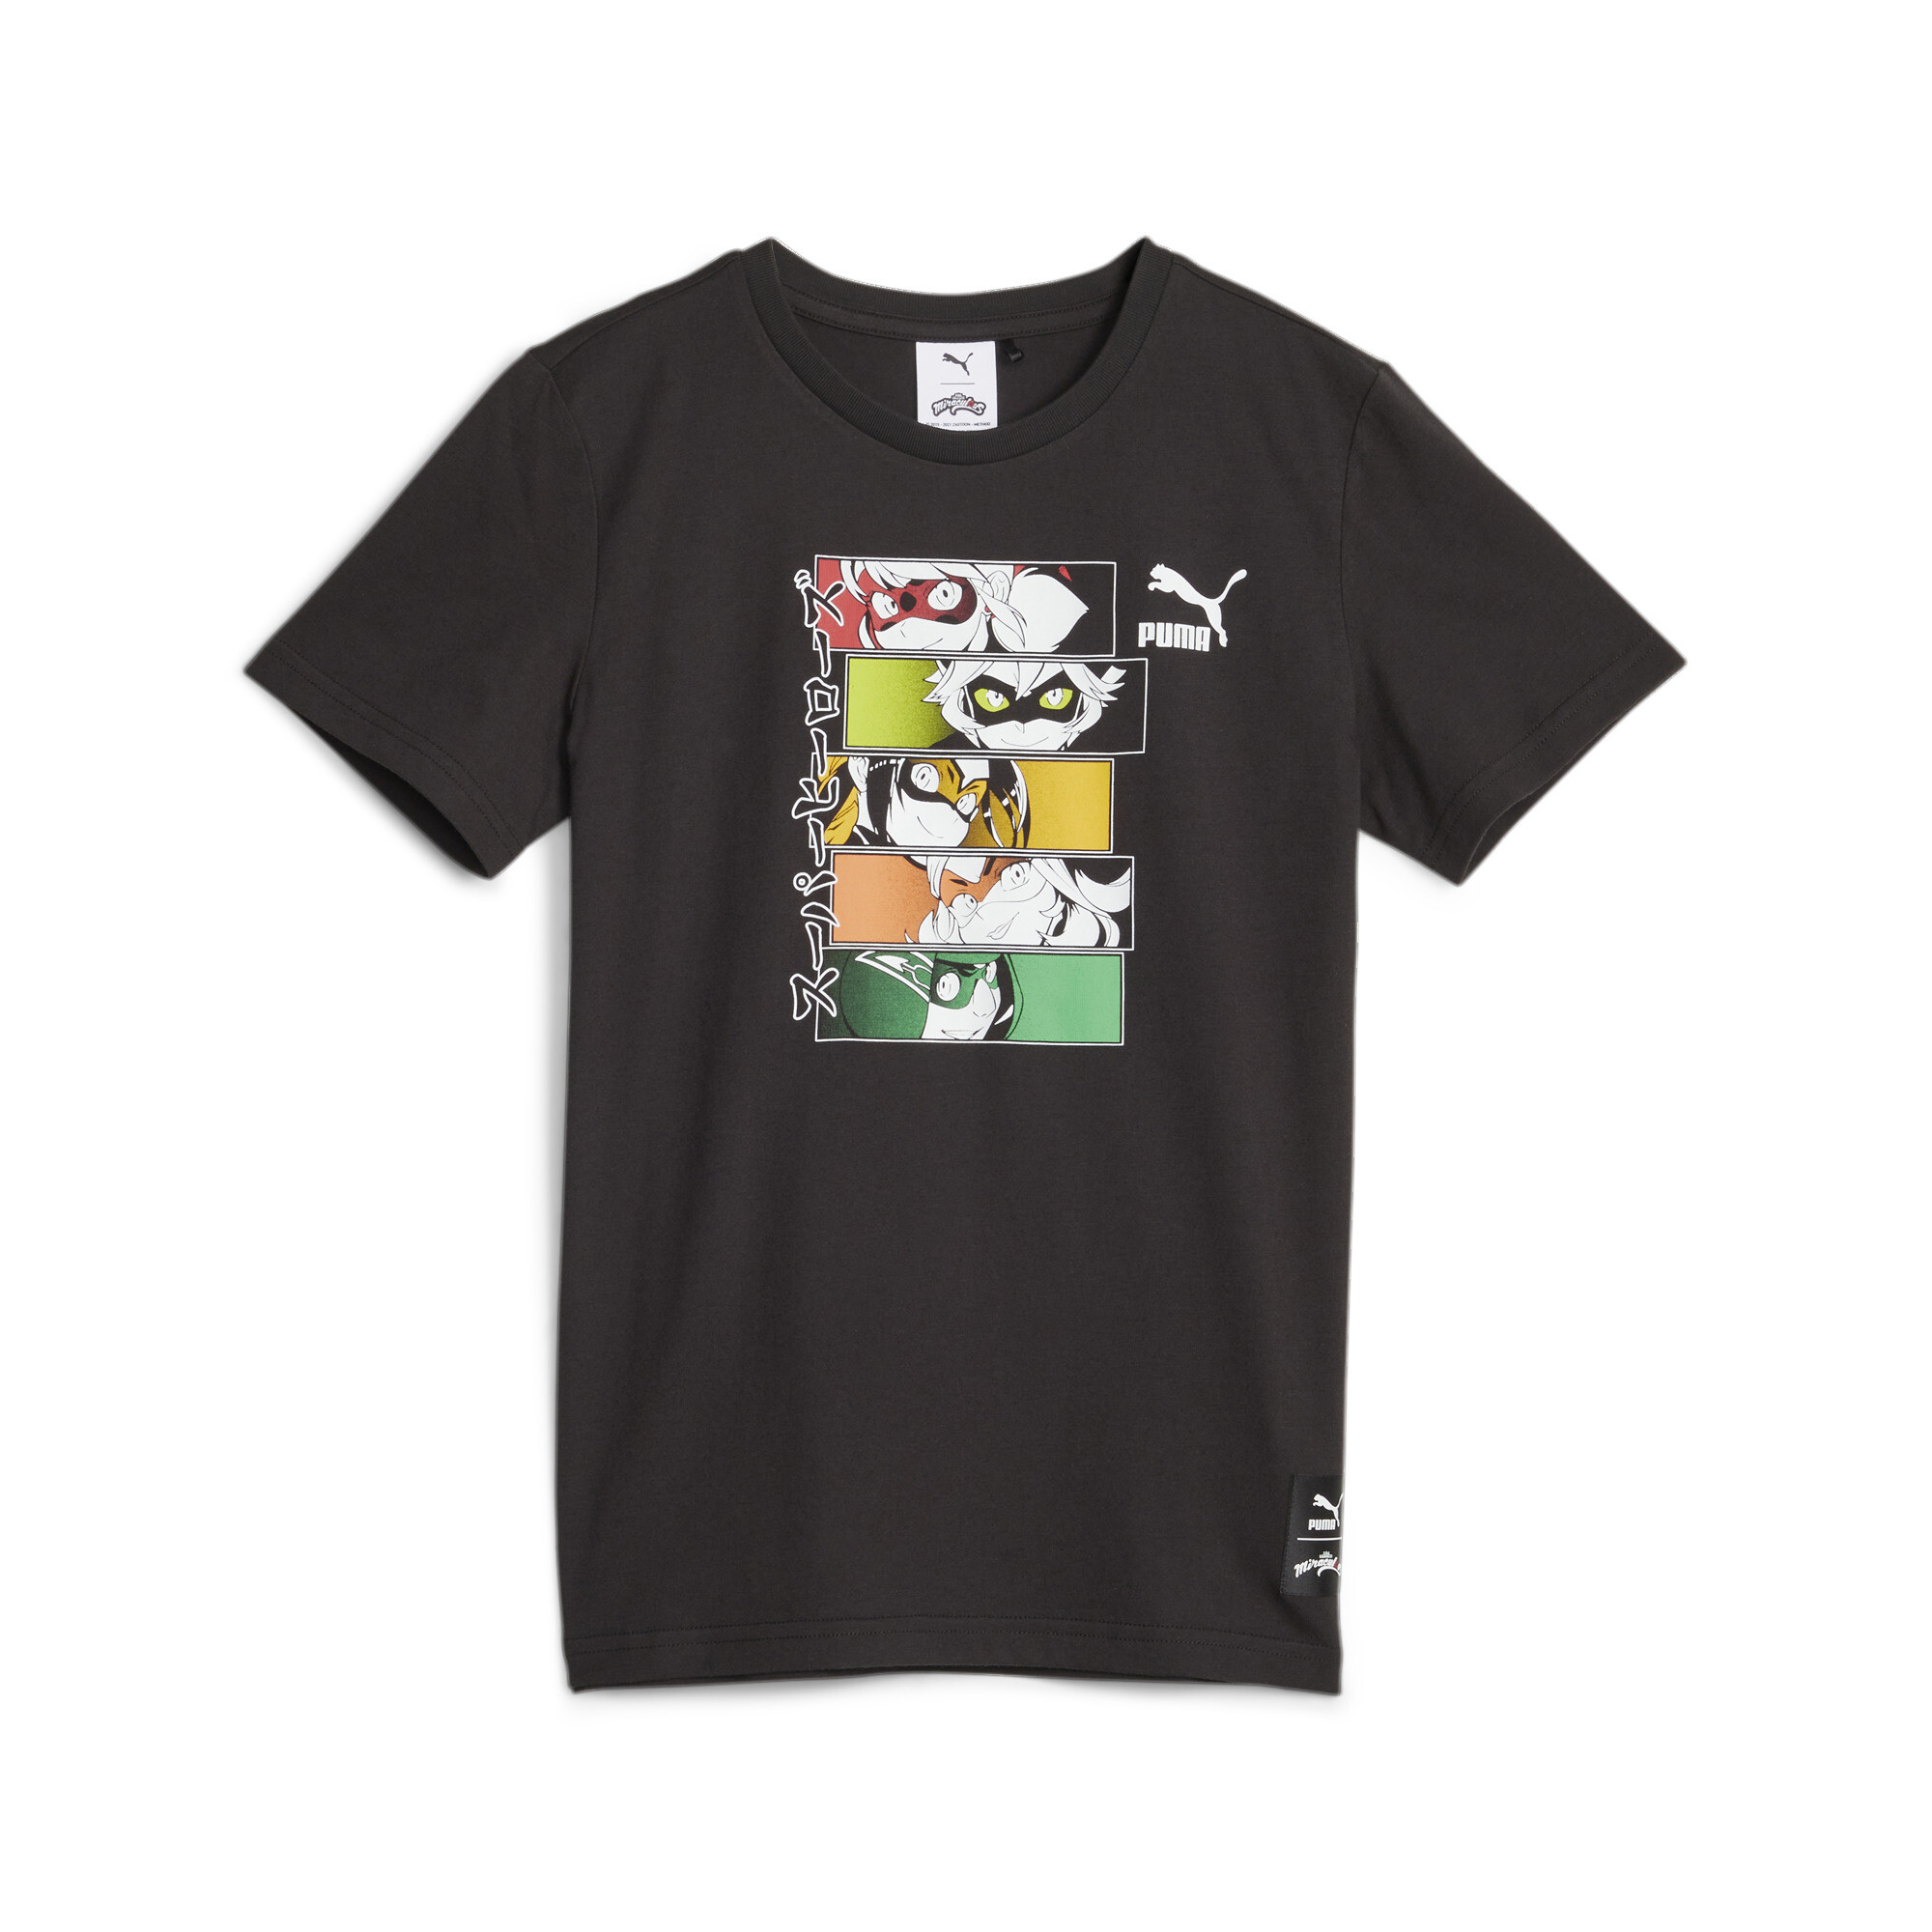 PUMA X MIRACULOUS T-Shirt In 10 - Black, Size 9-10 Youth